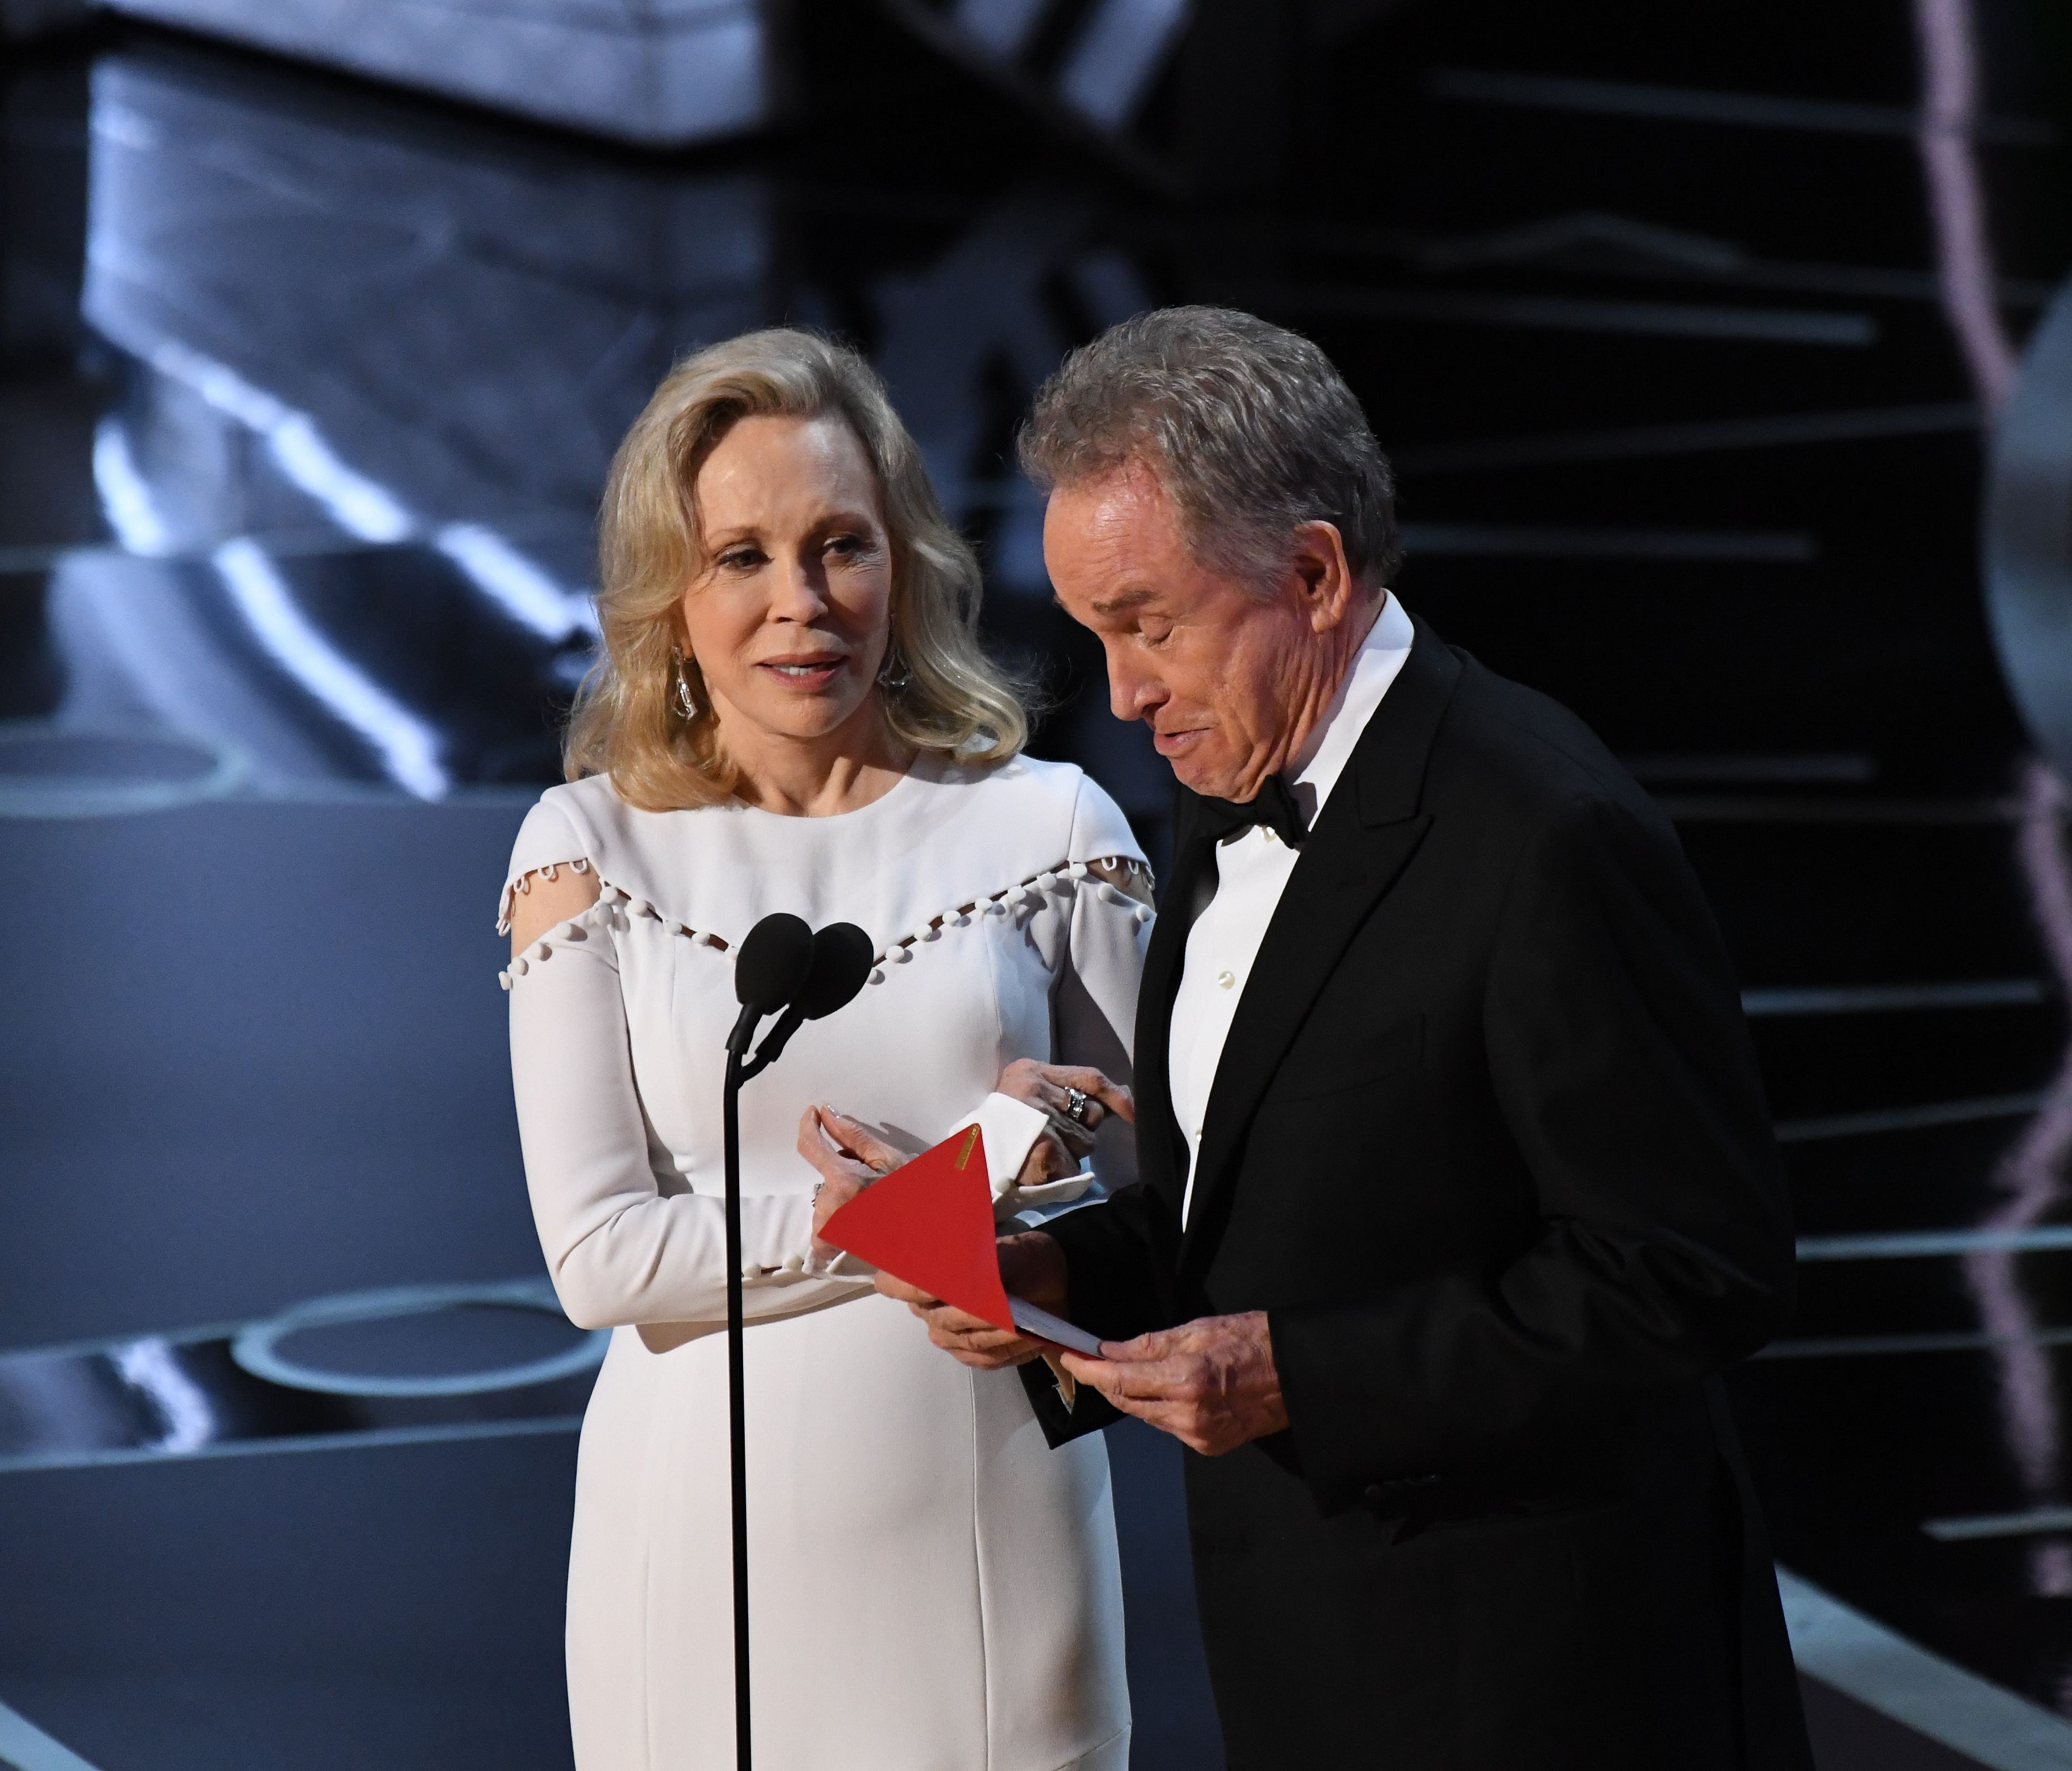 Faye Dunaway and Warren Beatty present the award for best picture.